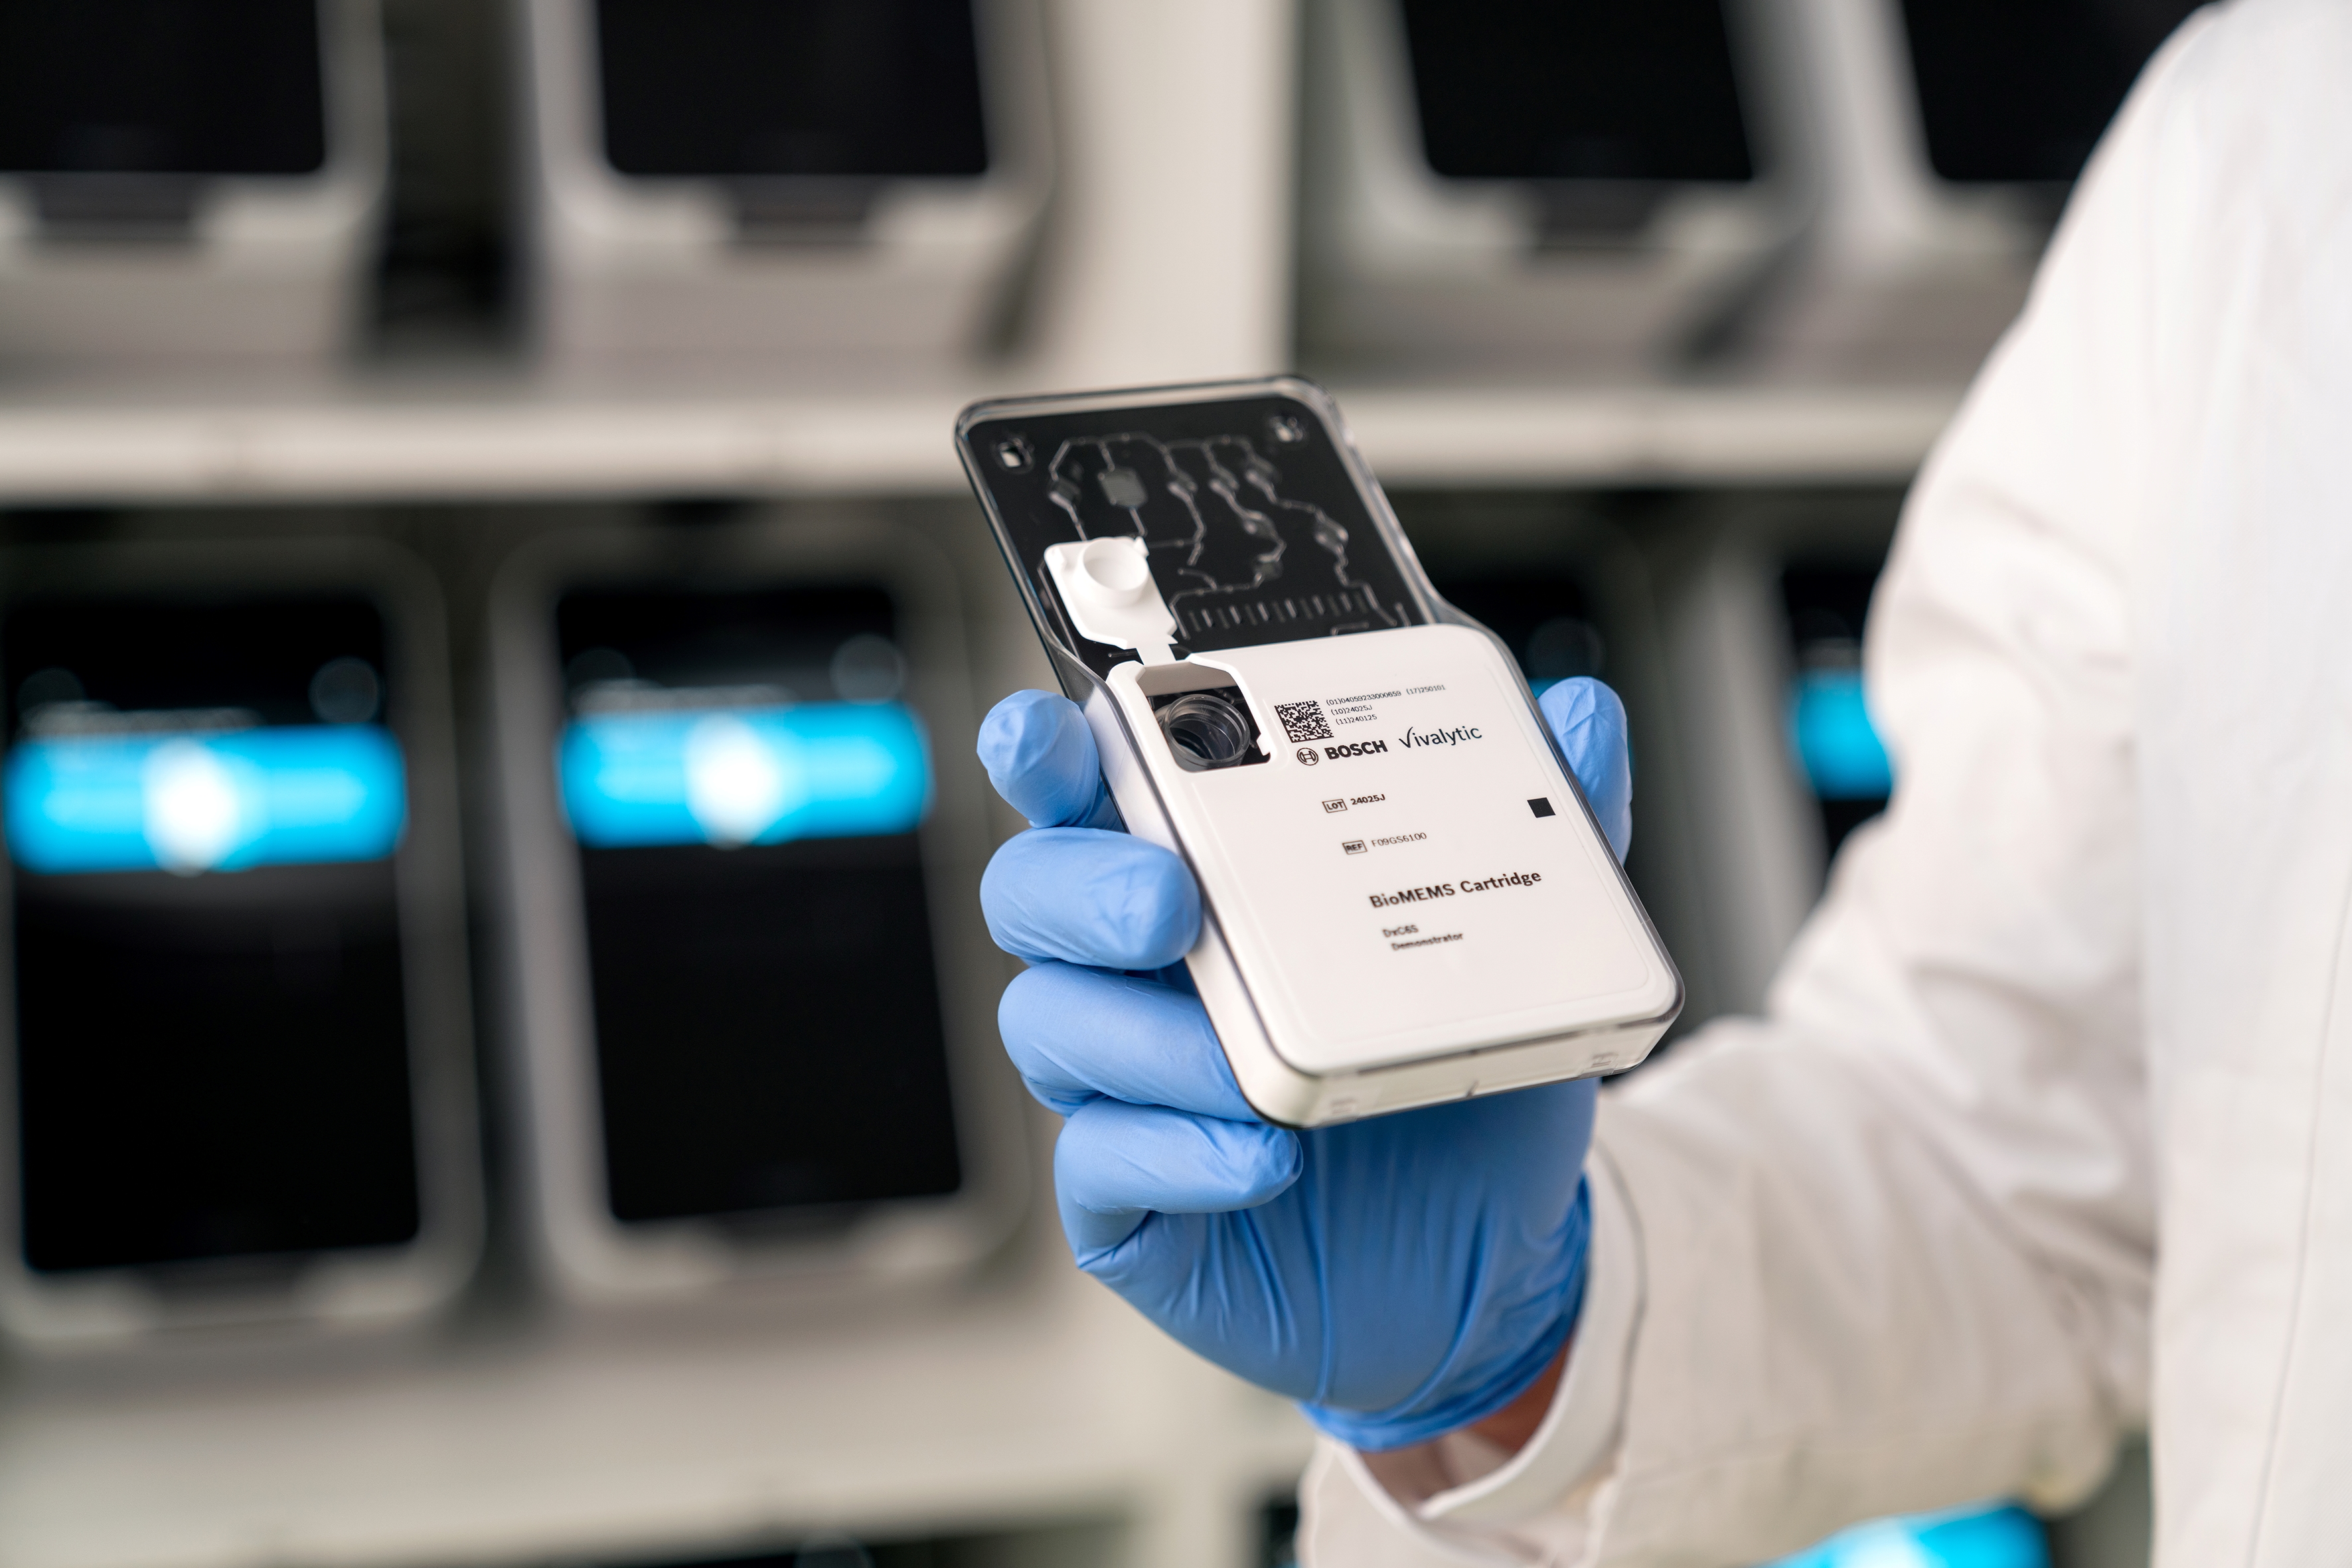 Laboratory the size of a smartphone: Prototype of a BioMEMS test cartridge for the Vivalytic analysis platform